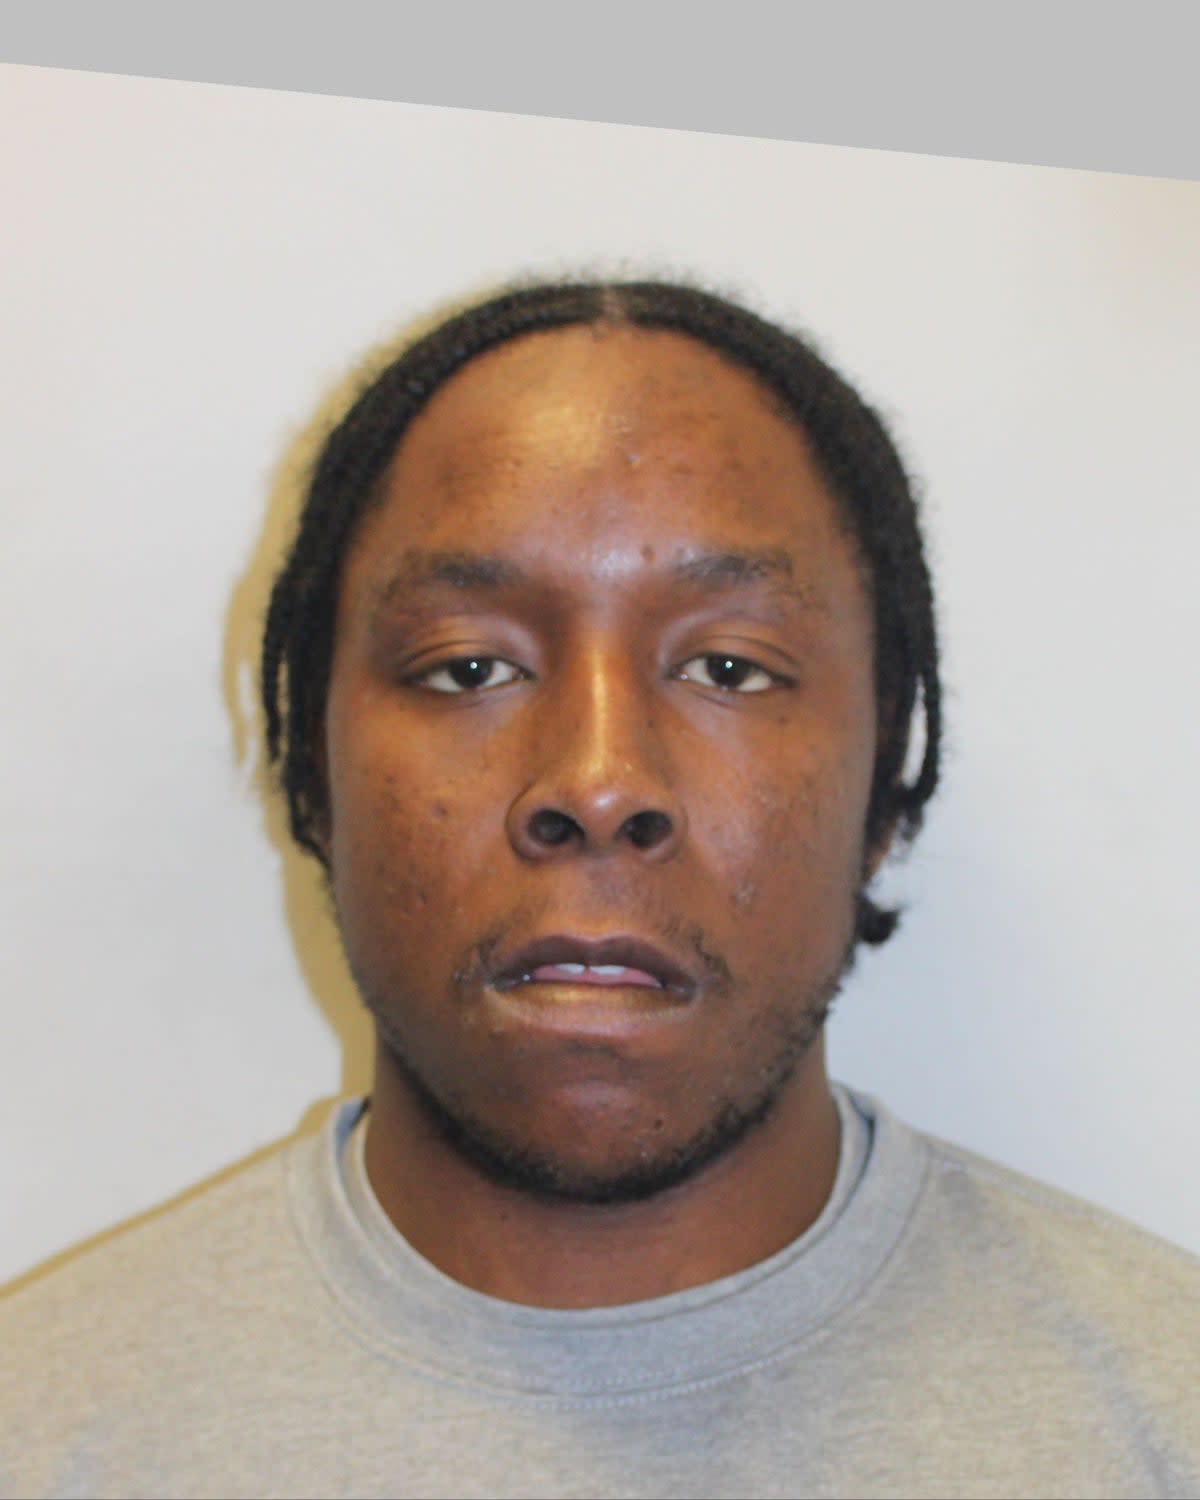 Joshua Jacques, A cannabis addict who killed three generations of his girlfriendâ€™s family when years of smoking pot turned him into a homicial maniac is facing life in jail. (Met Police)